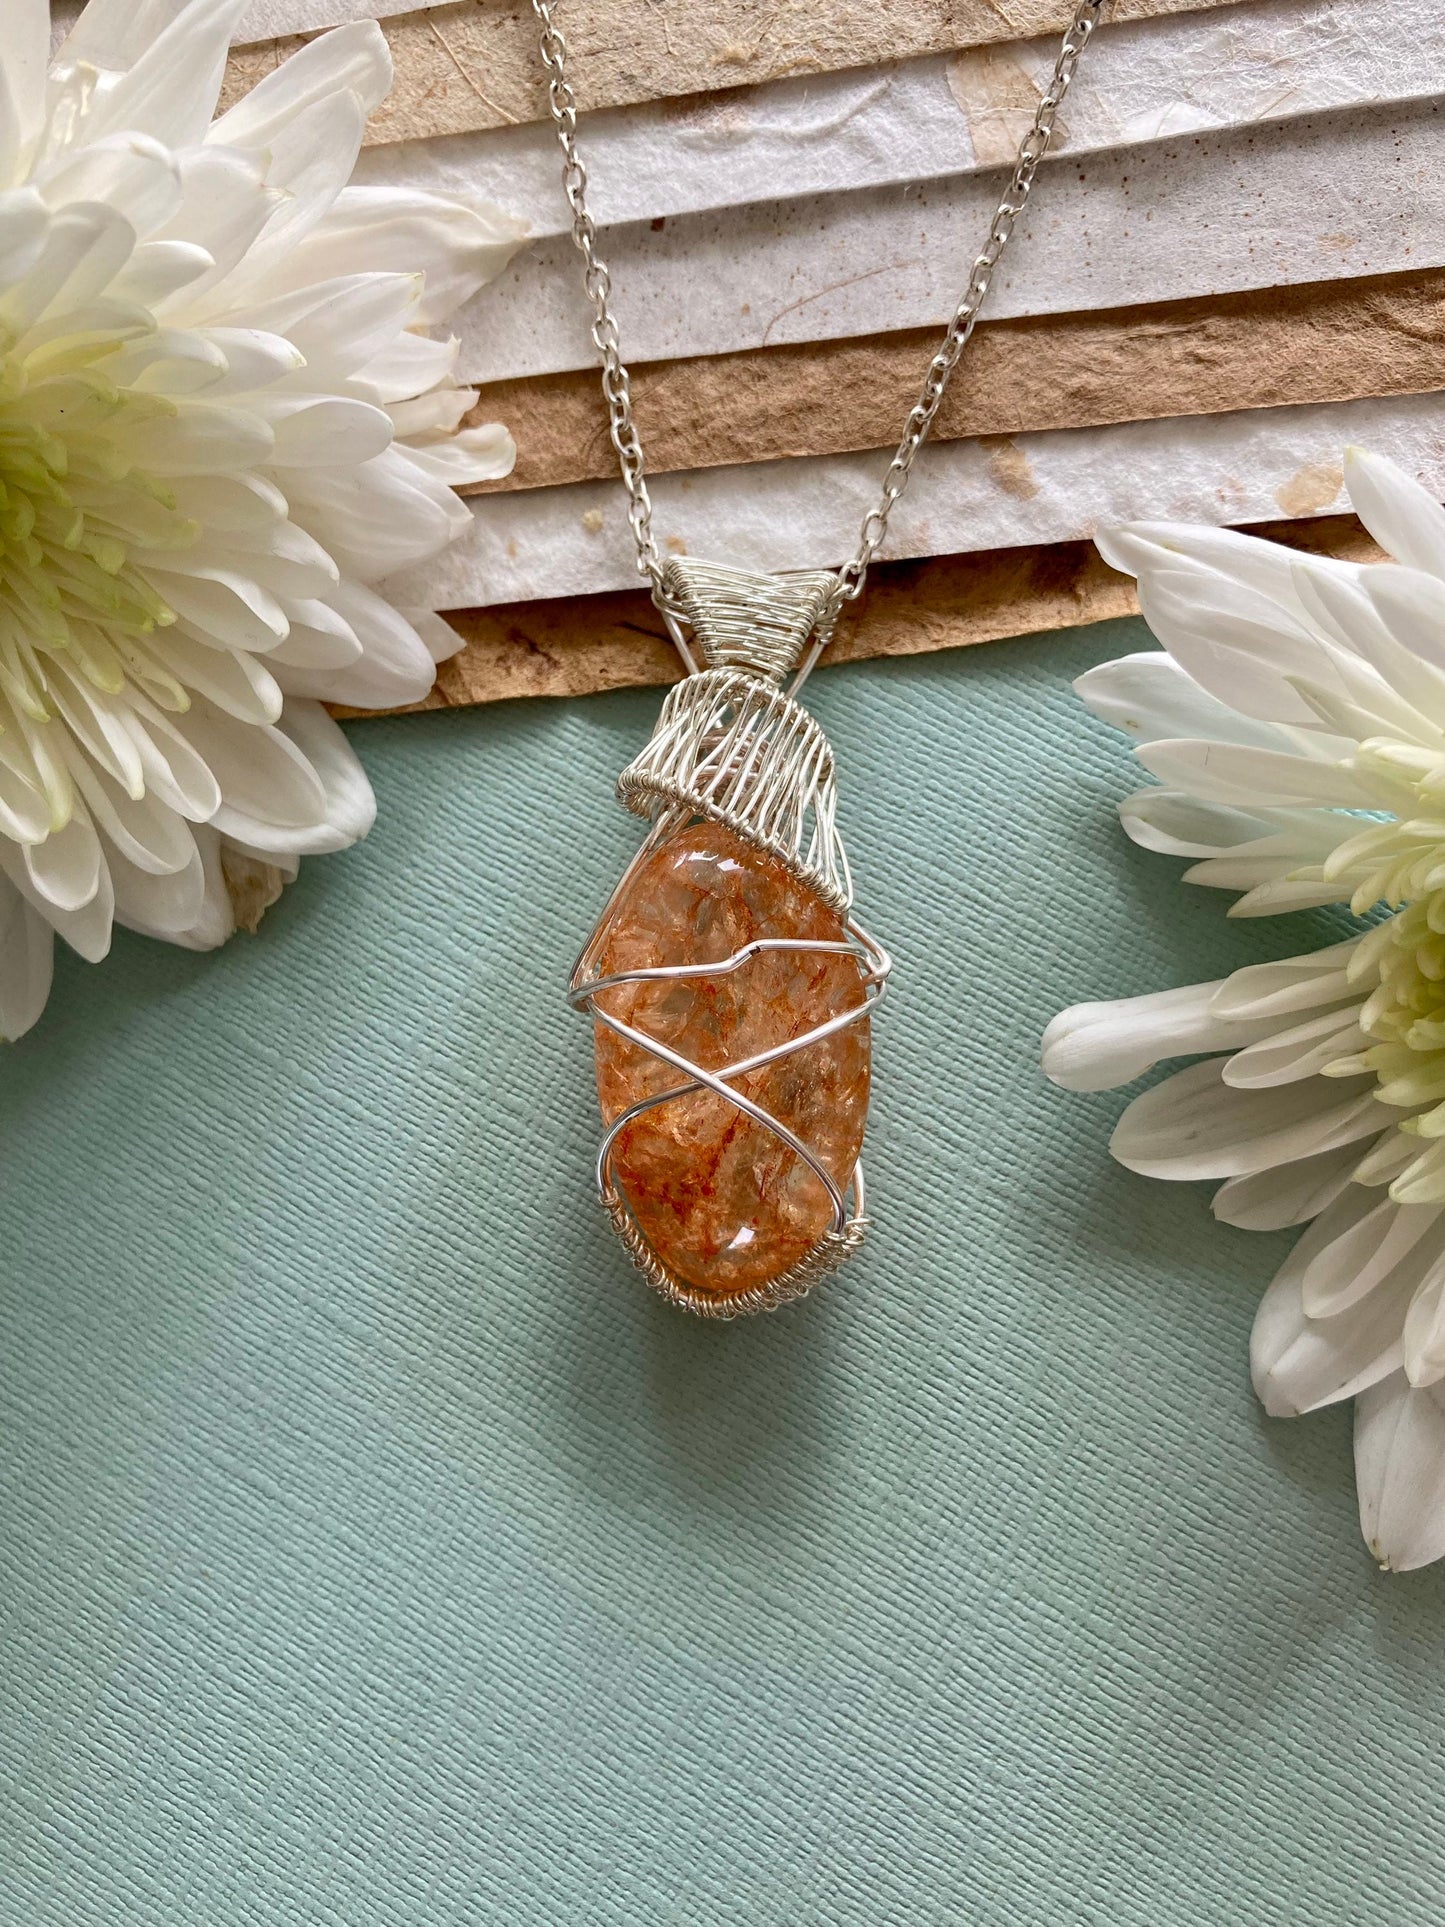 Quartz pendant handmade necklace wire wrapped natural stone with 18 inch length chains